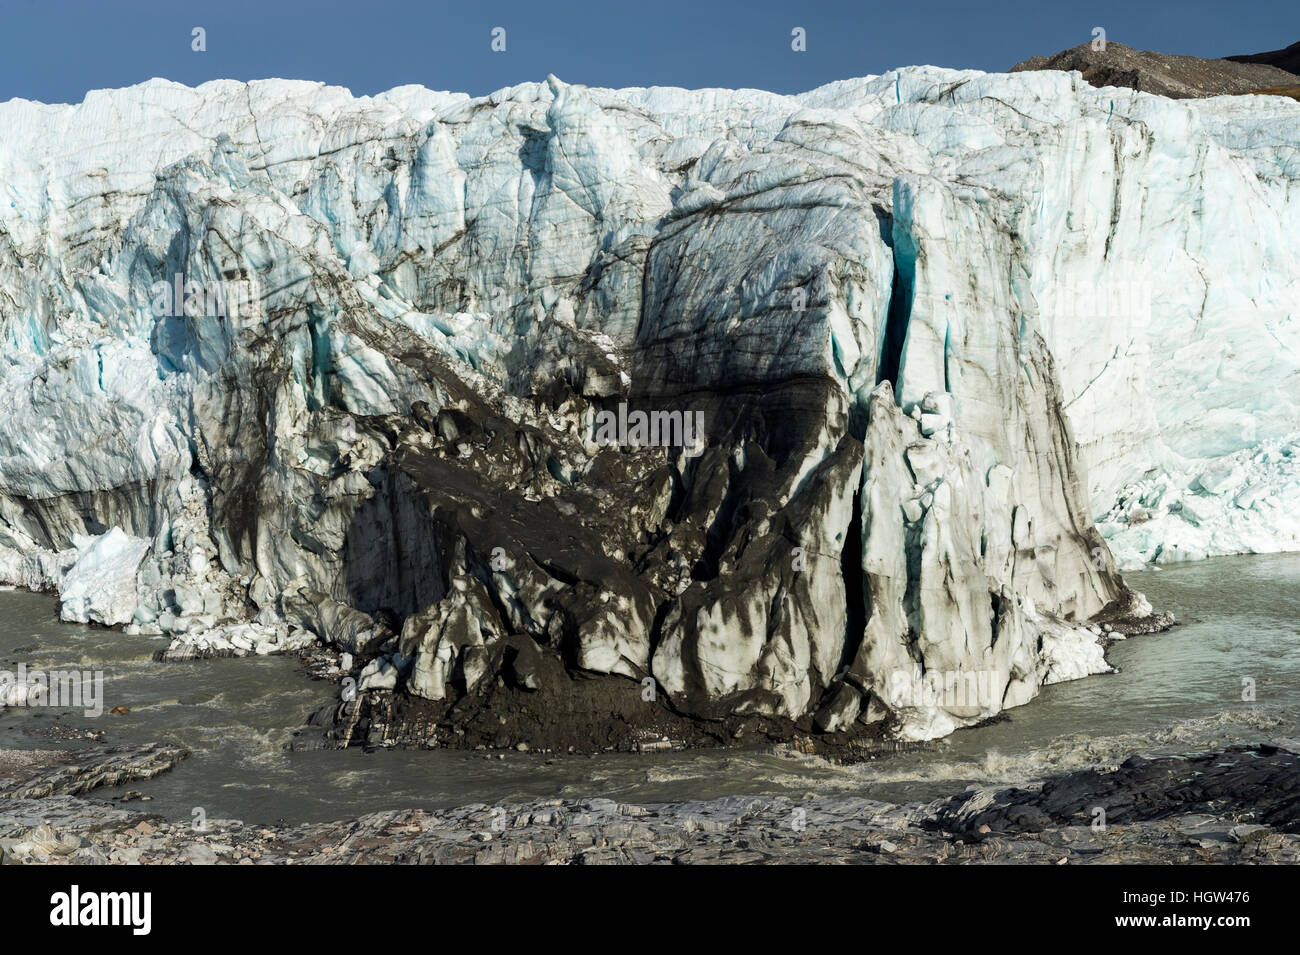 Erosion from ice against rock deposits silt and soil sediment on the face of a glacier fracture zone. Stock Photo